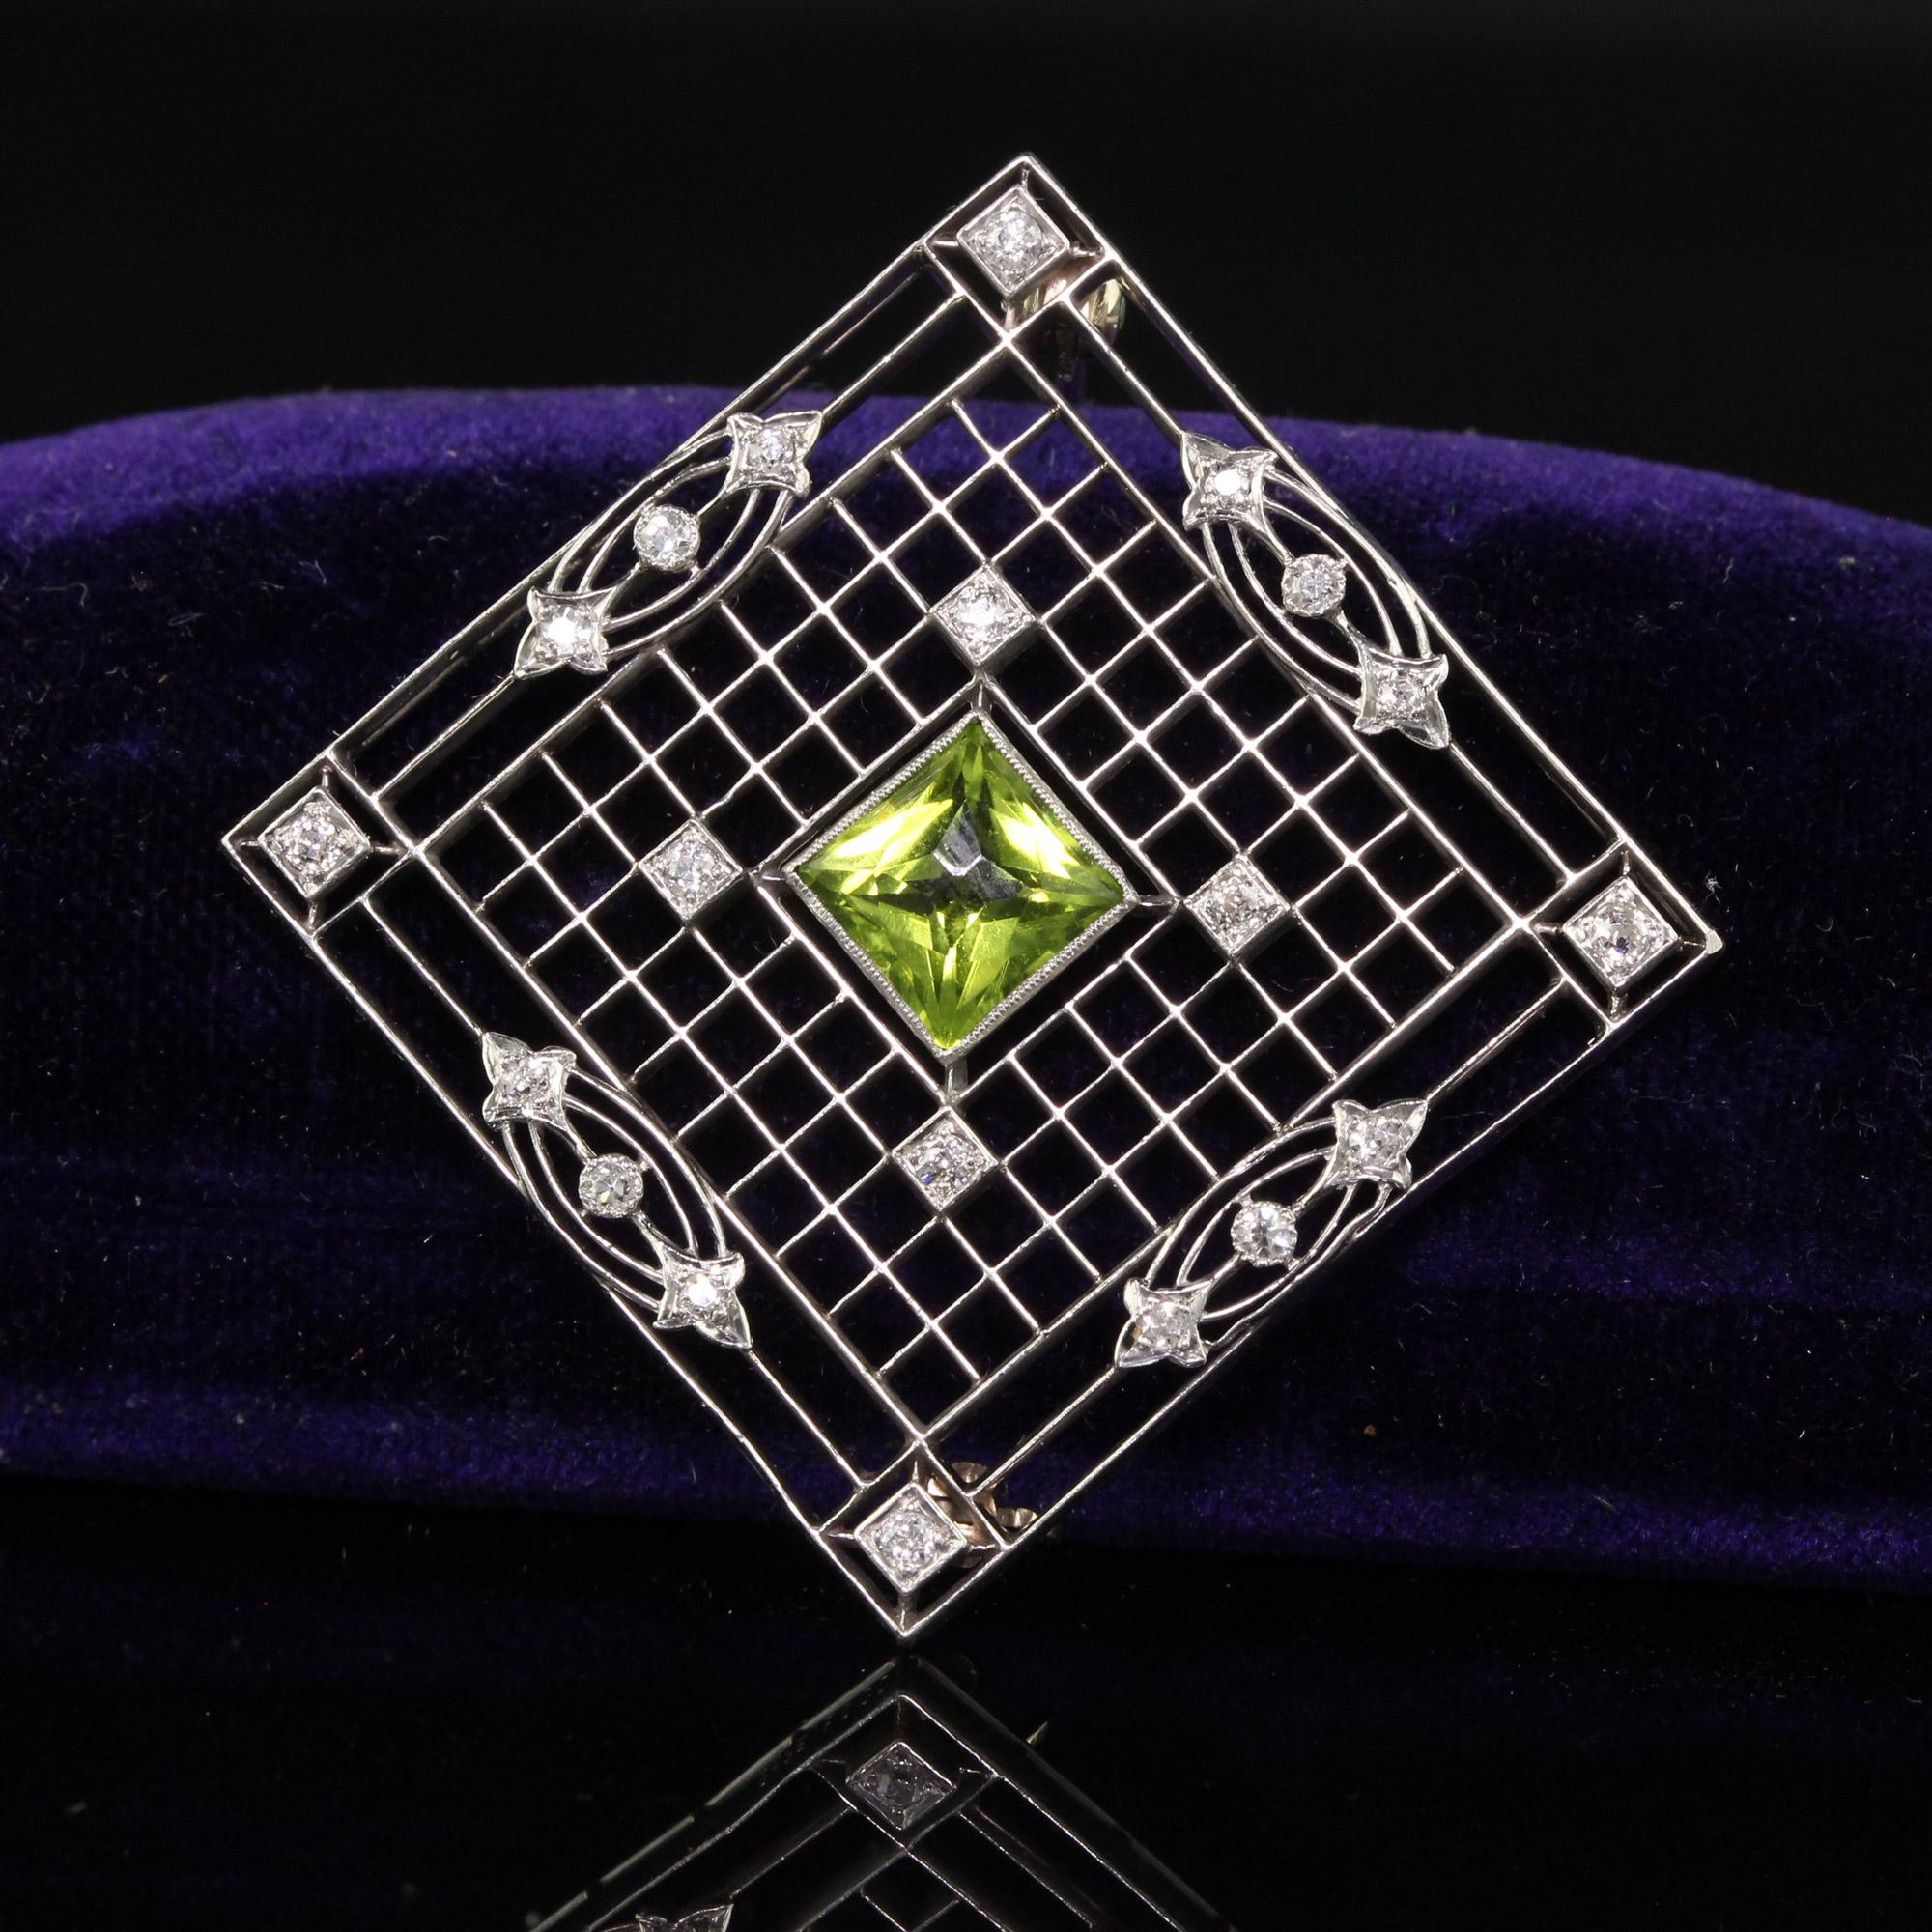 Beautiful Antique Art Deco Shreve and Co Platinum French Cut Peridot Diamond Filigree Pin. This incredible Shreve and Co pin is crafted in platinum. The center holds a gorgeous French cut peridot and has old cut diamonds set in filigree stations